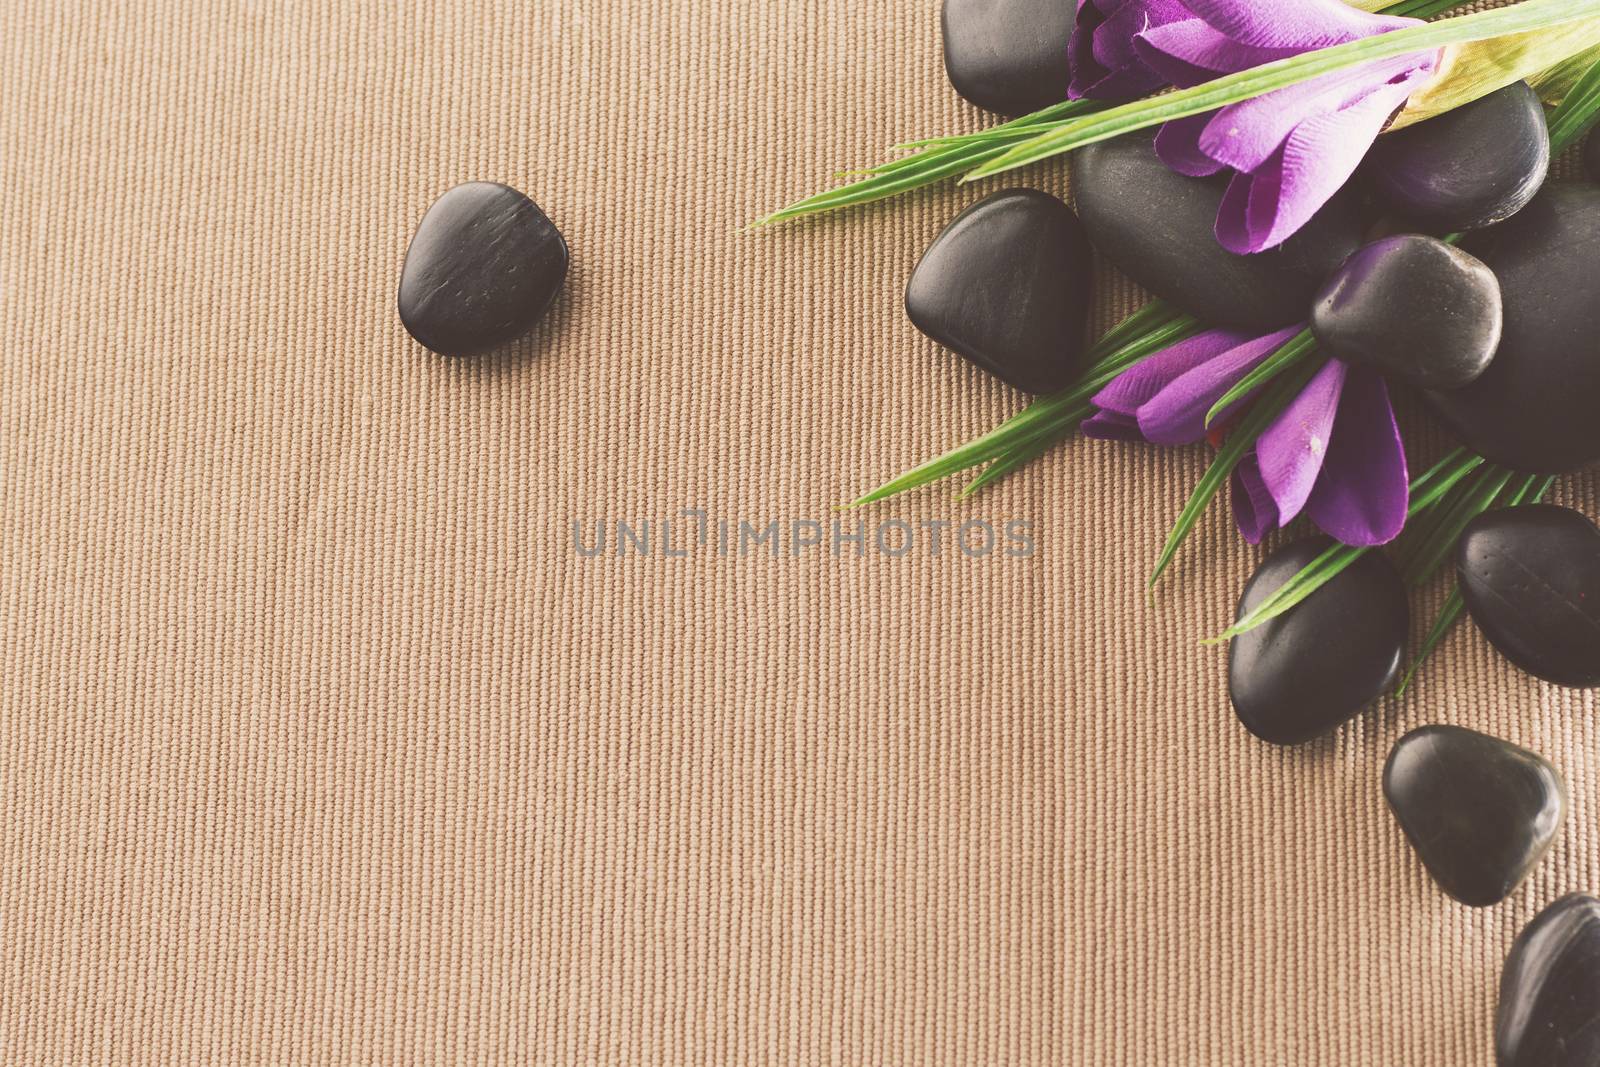 massage stones with flowers on mat by dolgachov